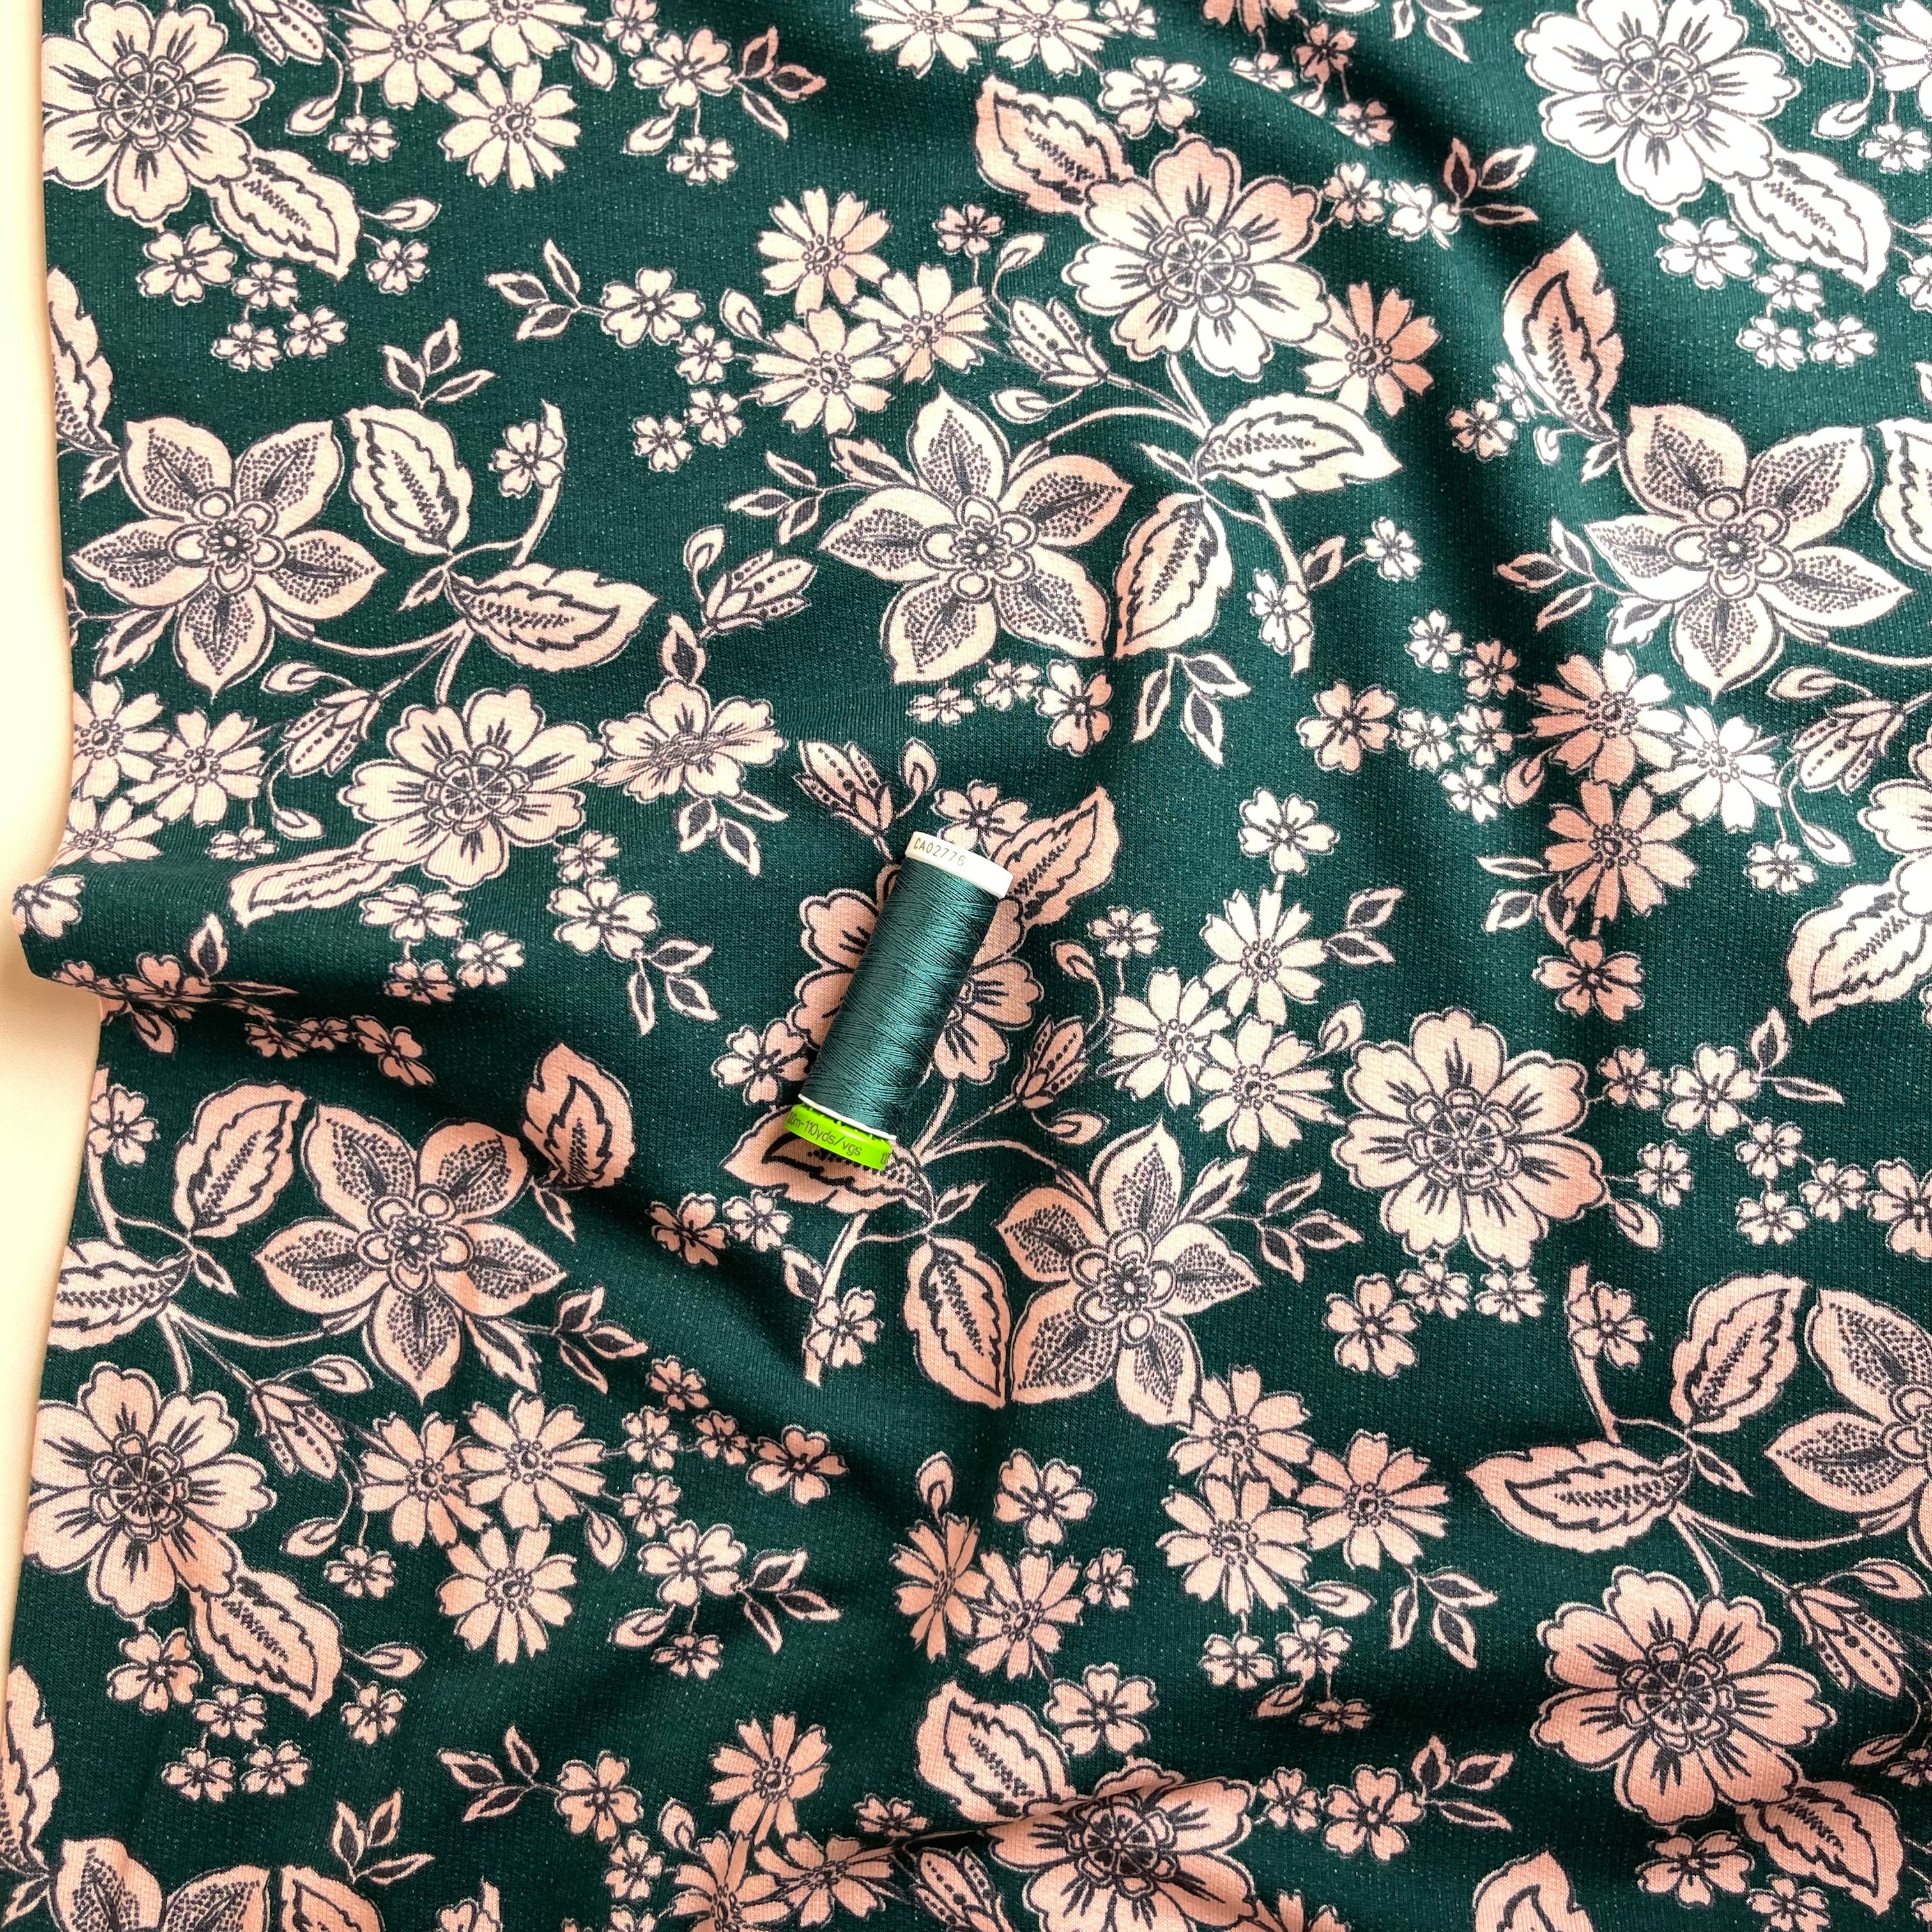 REMNANT 0.28 Metre - Line Flowers Teal Peach Soft Cotton Sweat-shirting Fabric